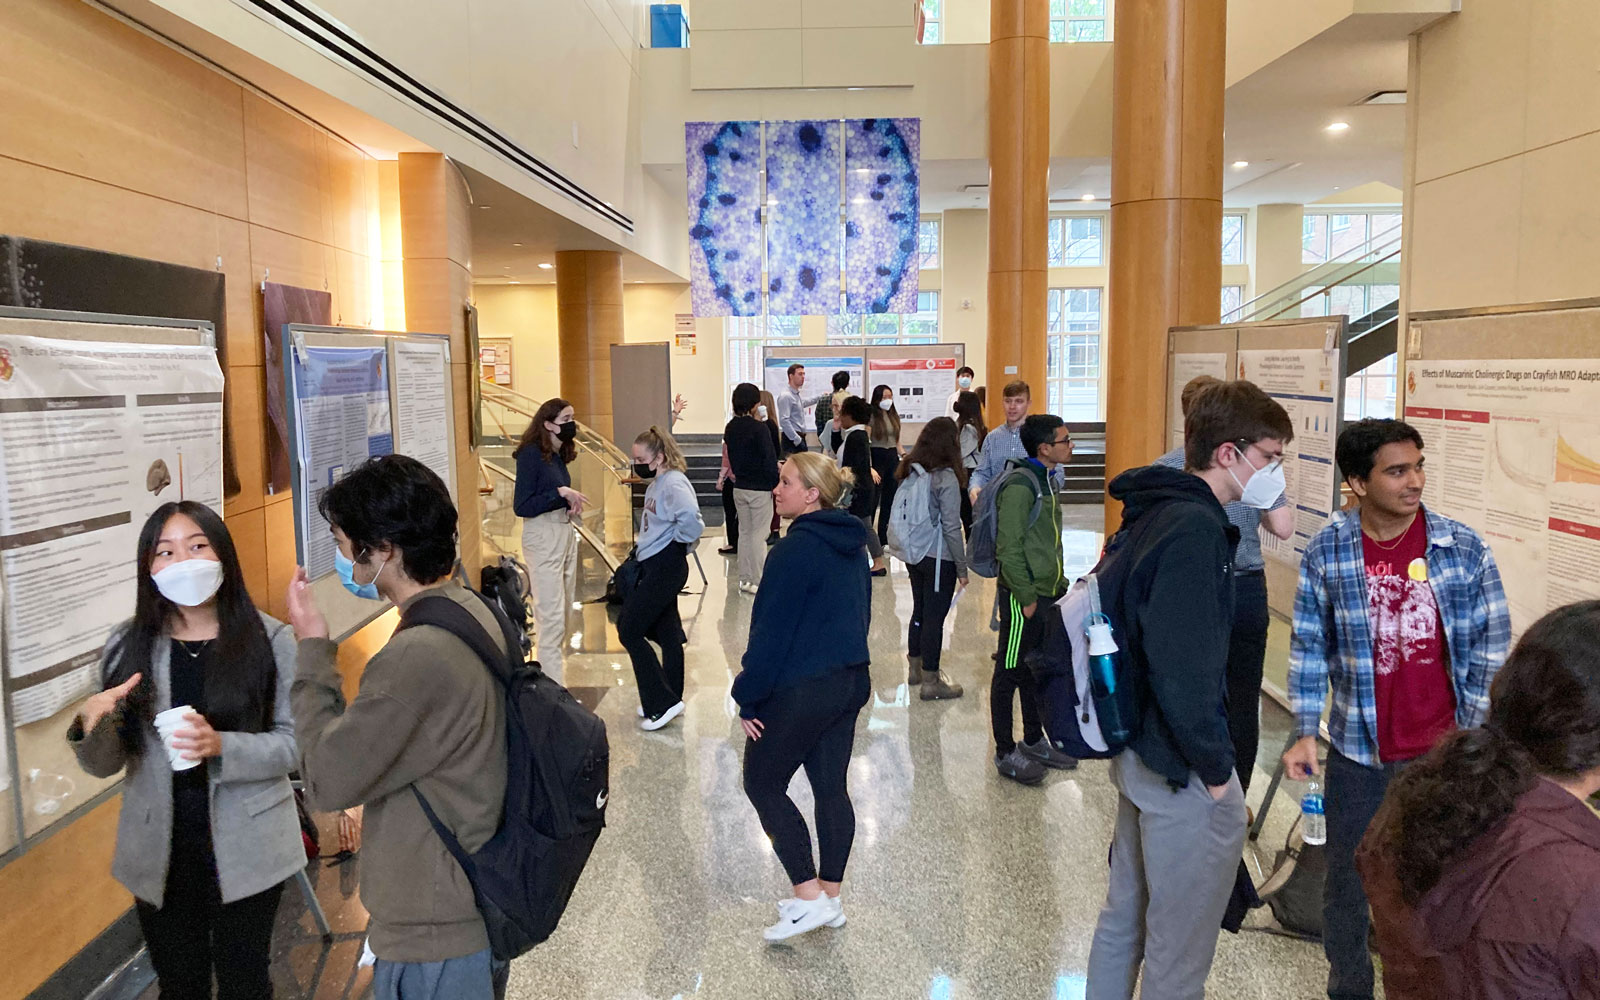 The first annual Undergraduate Neuroscience Research Fair was held on Friday, May 6, 2022.